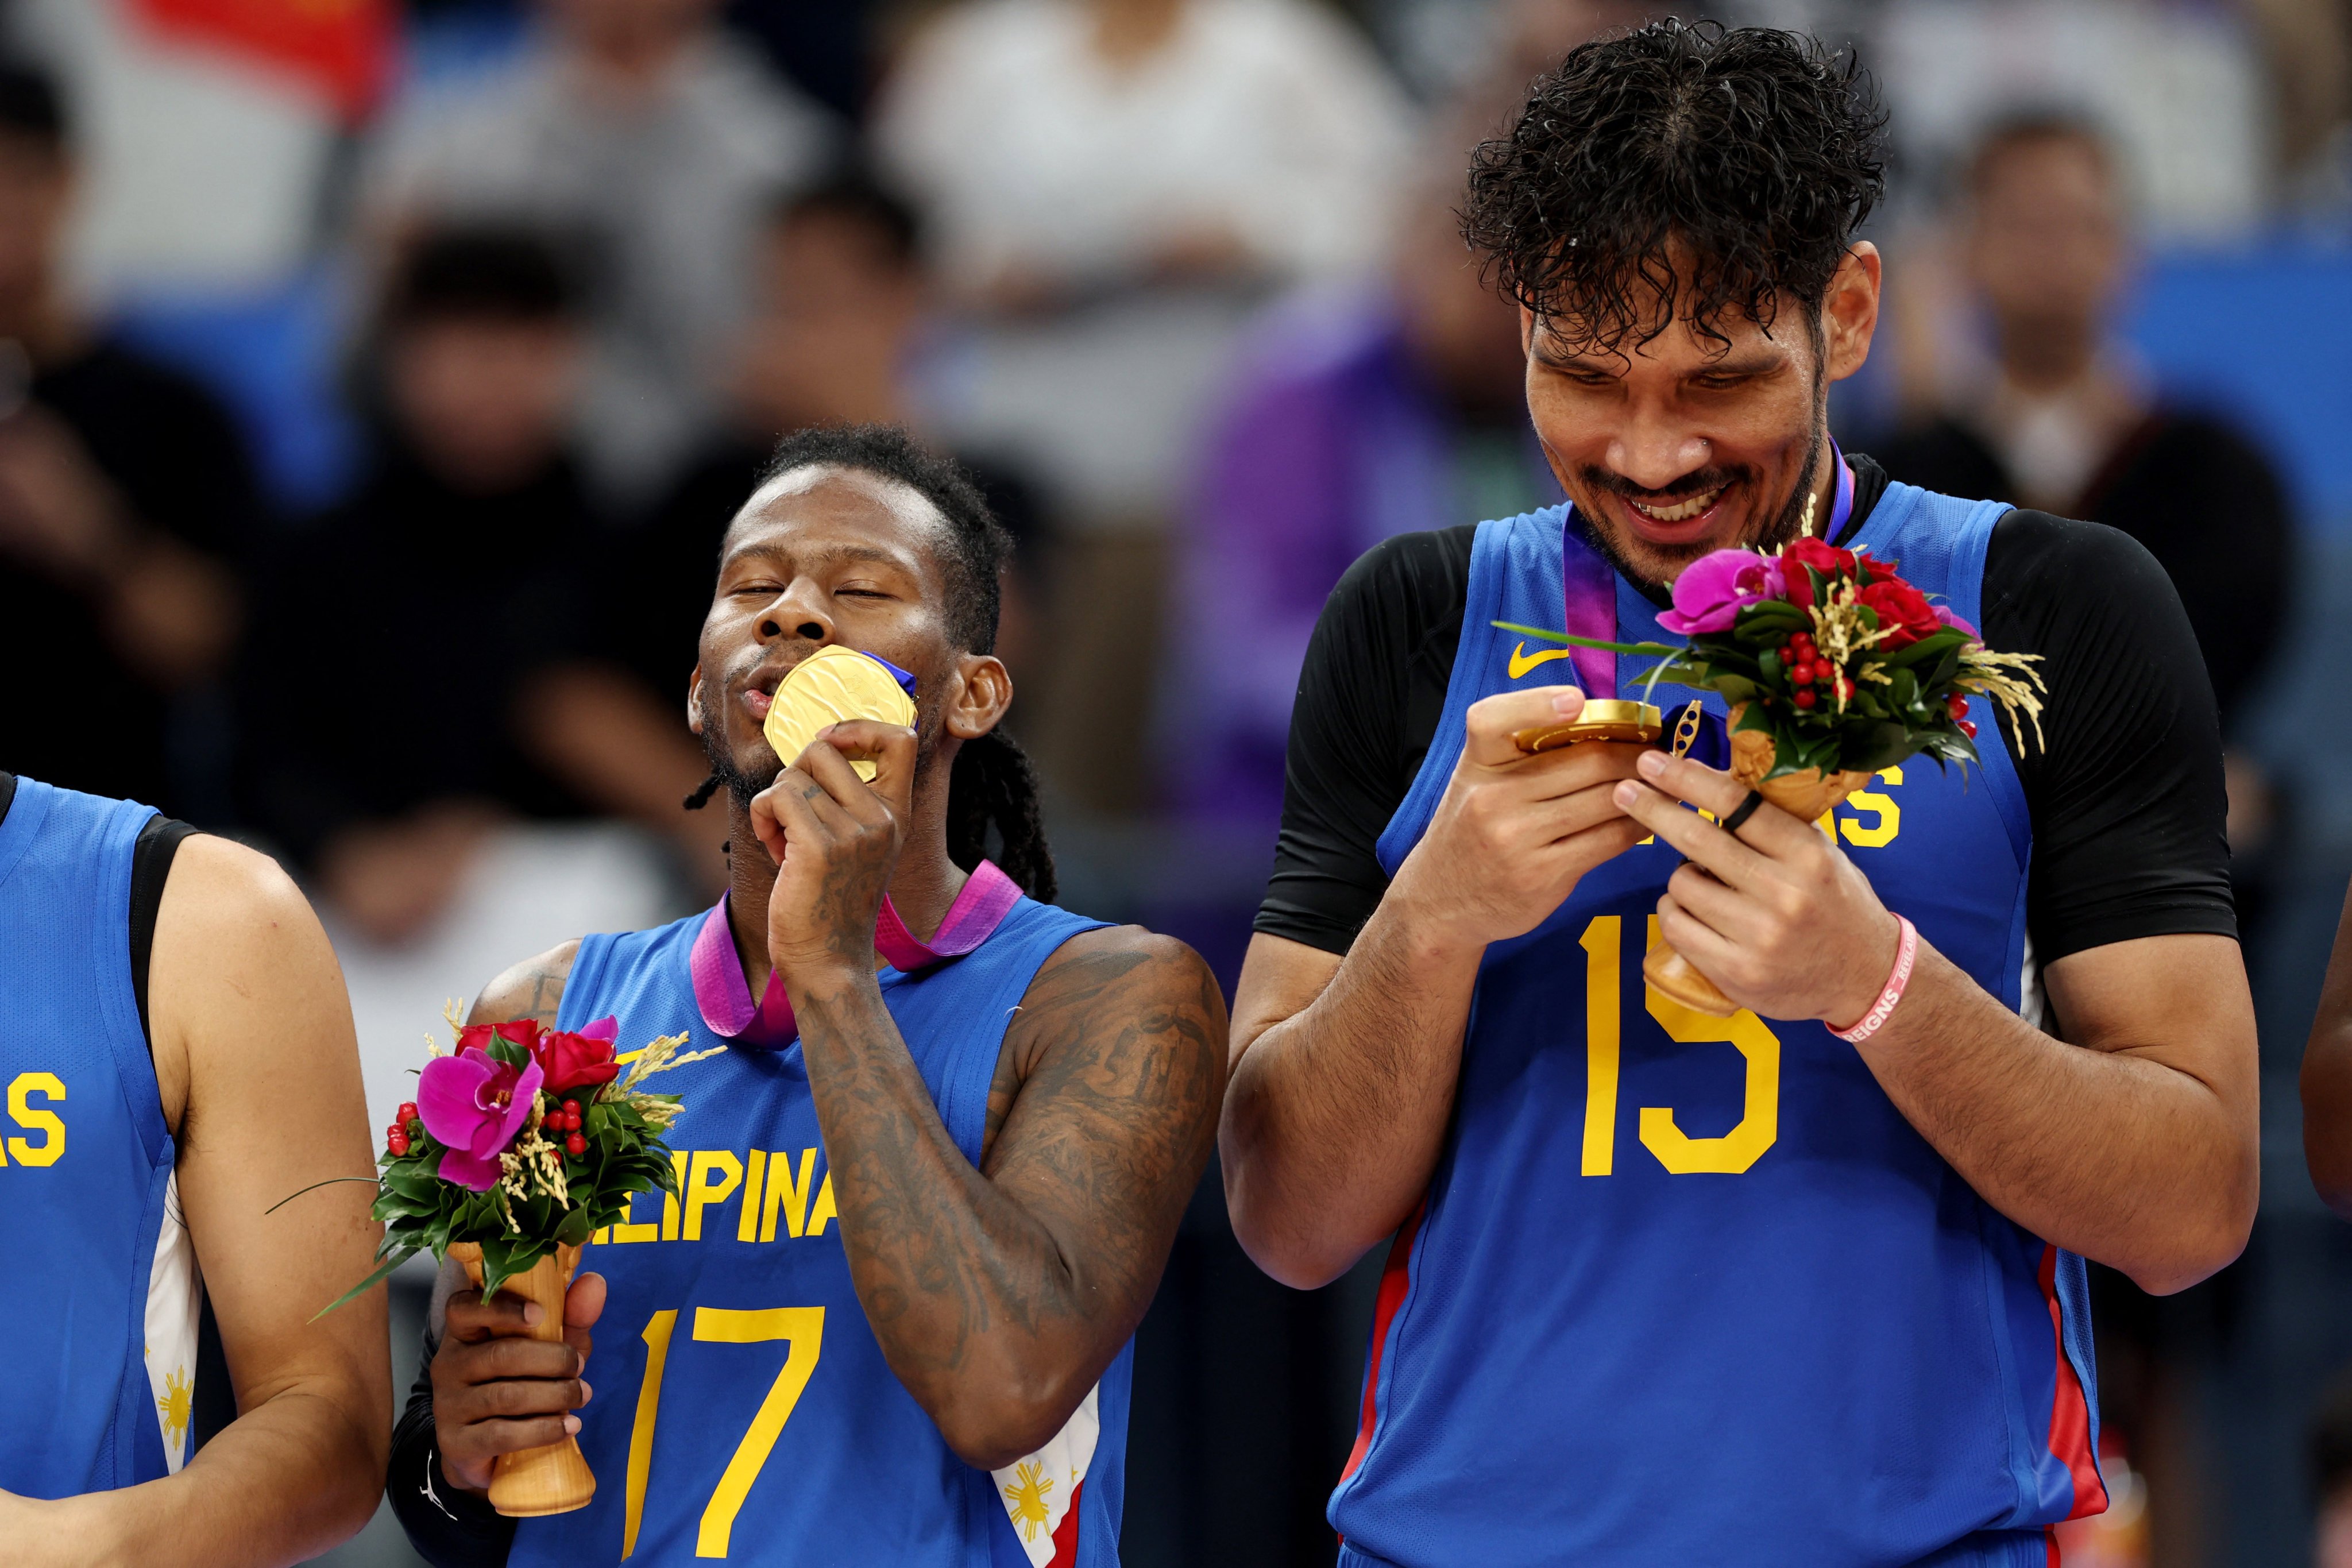 Perez Jaymar (left) and Fajardo Junemar celebrate with their gold medals after tje Philippines beat Jordan in the men’s basketball final at the Hangzhou Asian Games. Photo: Reuters